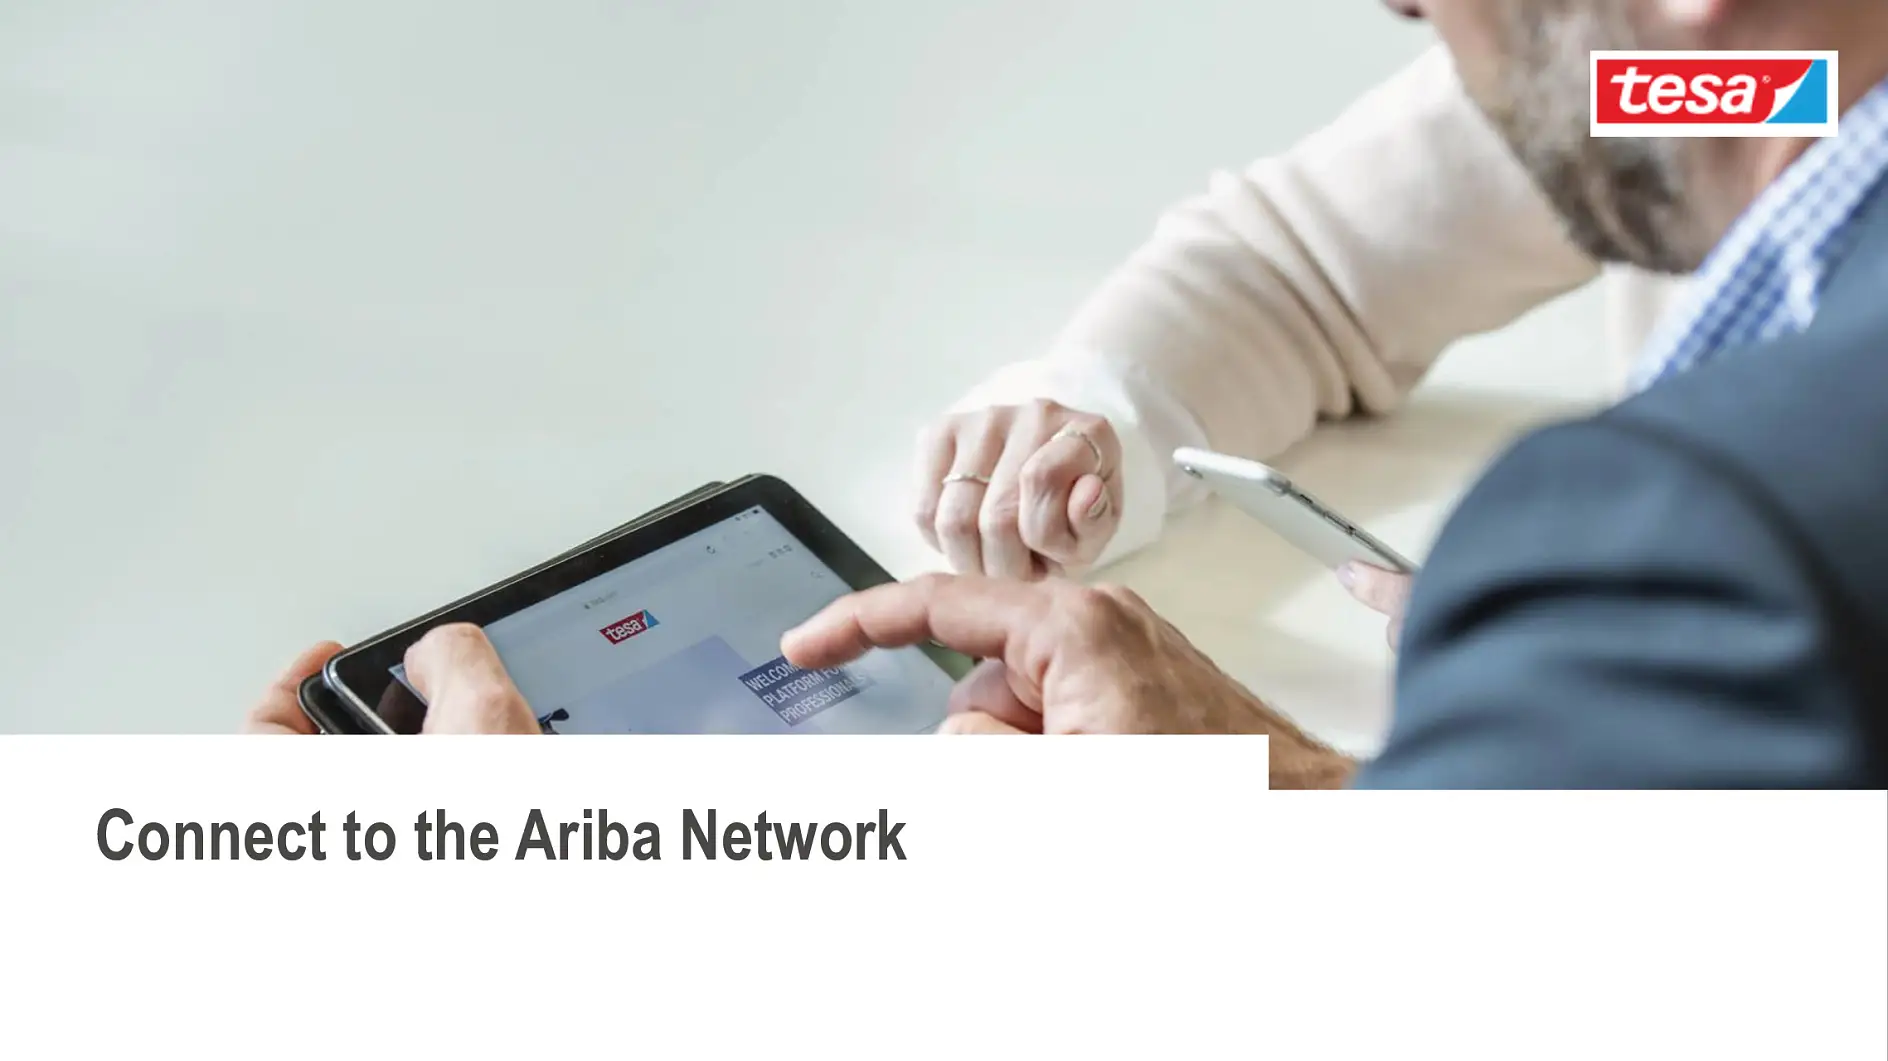 1. Connect to the Ariba Network